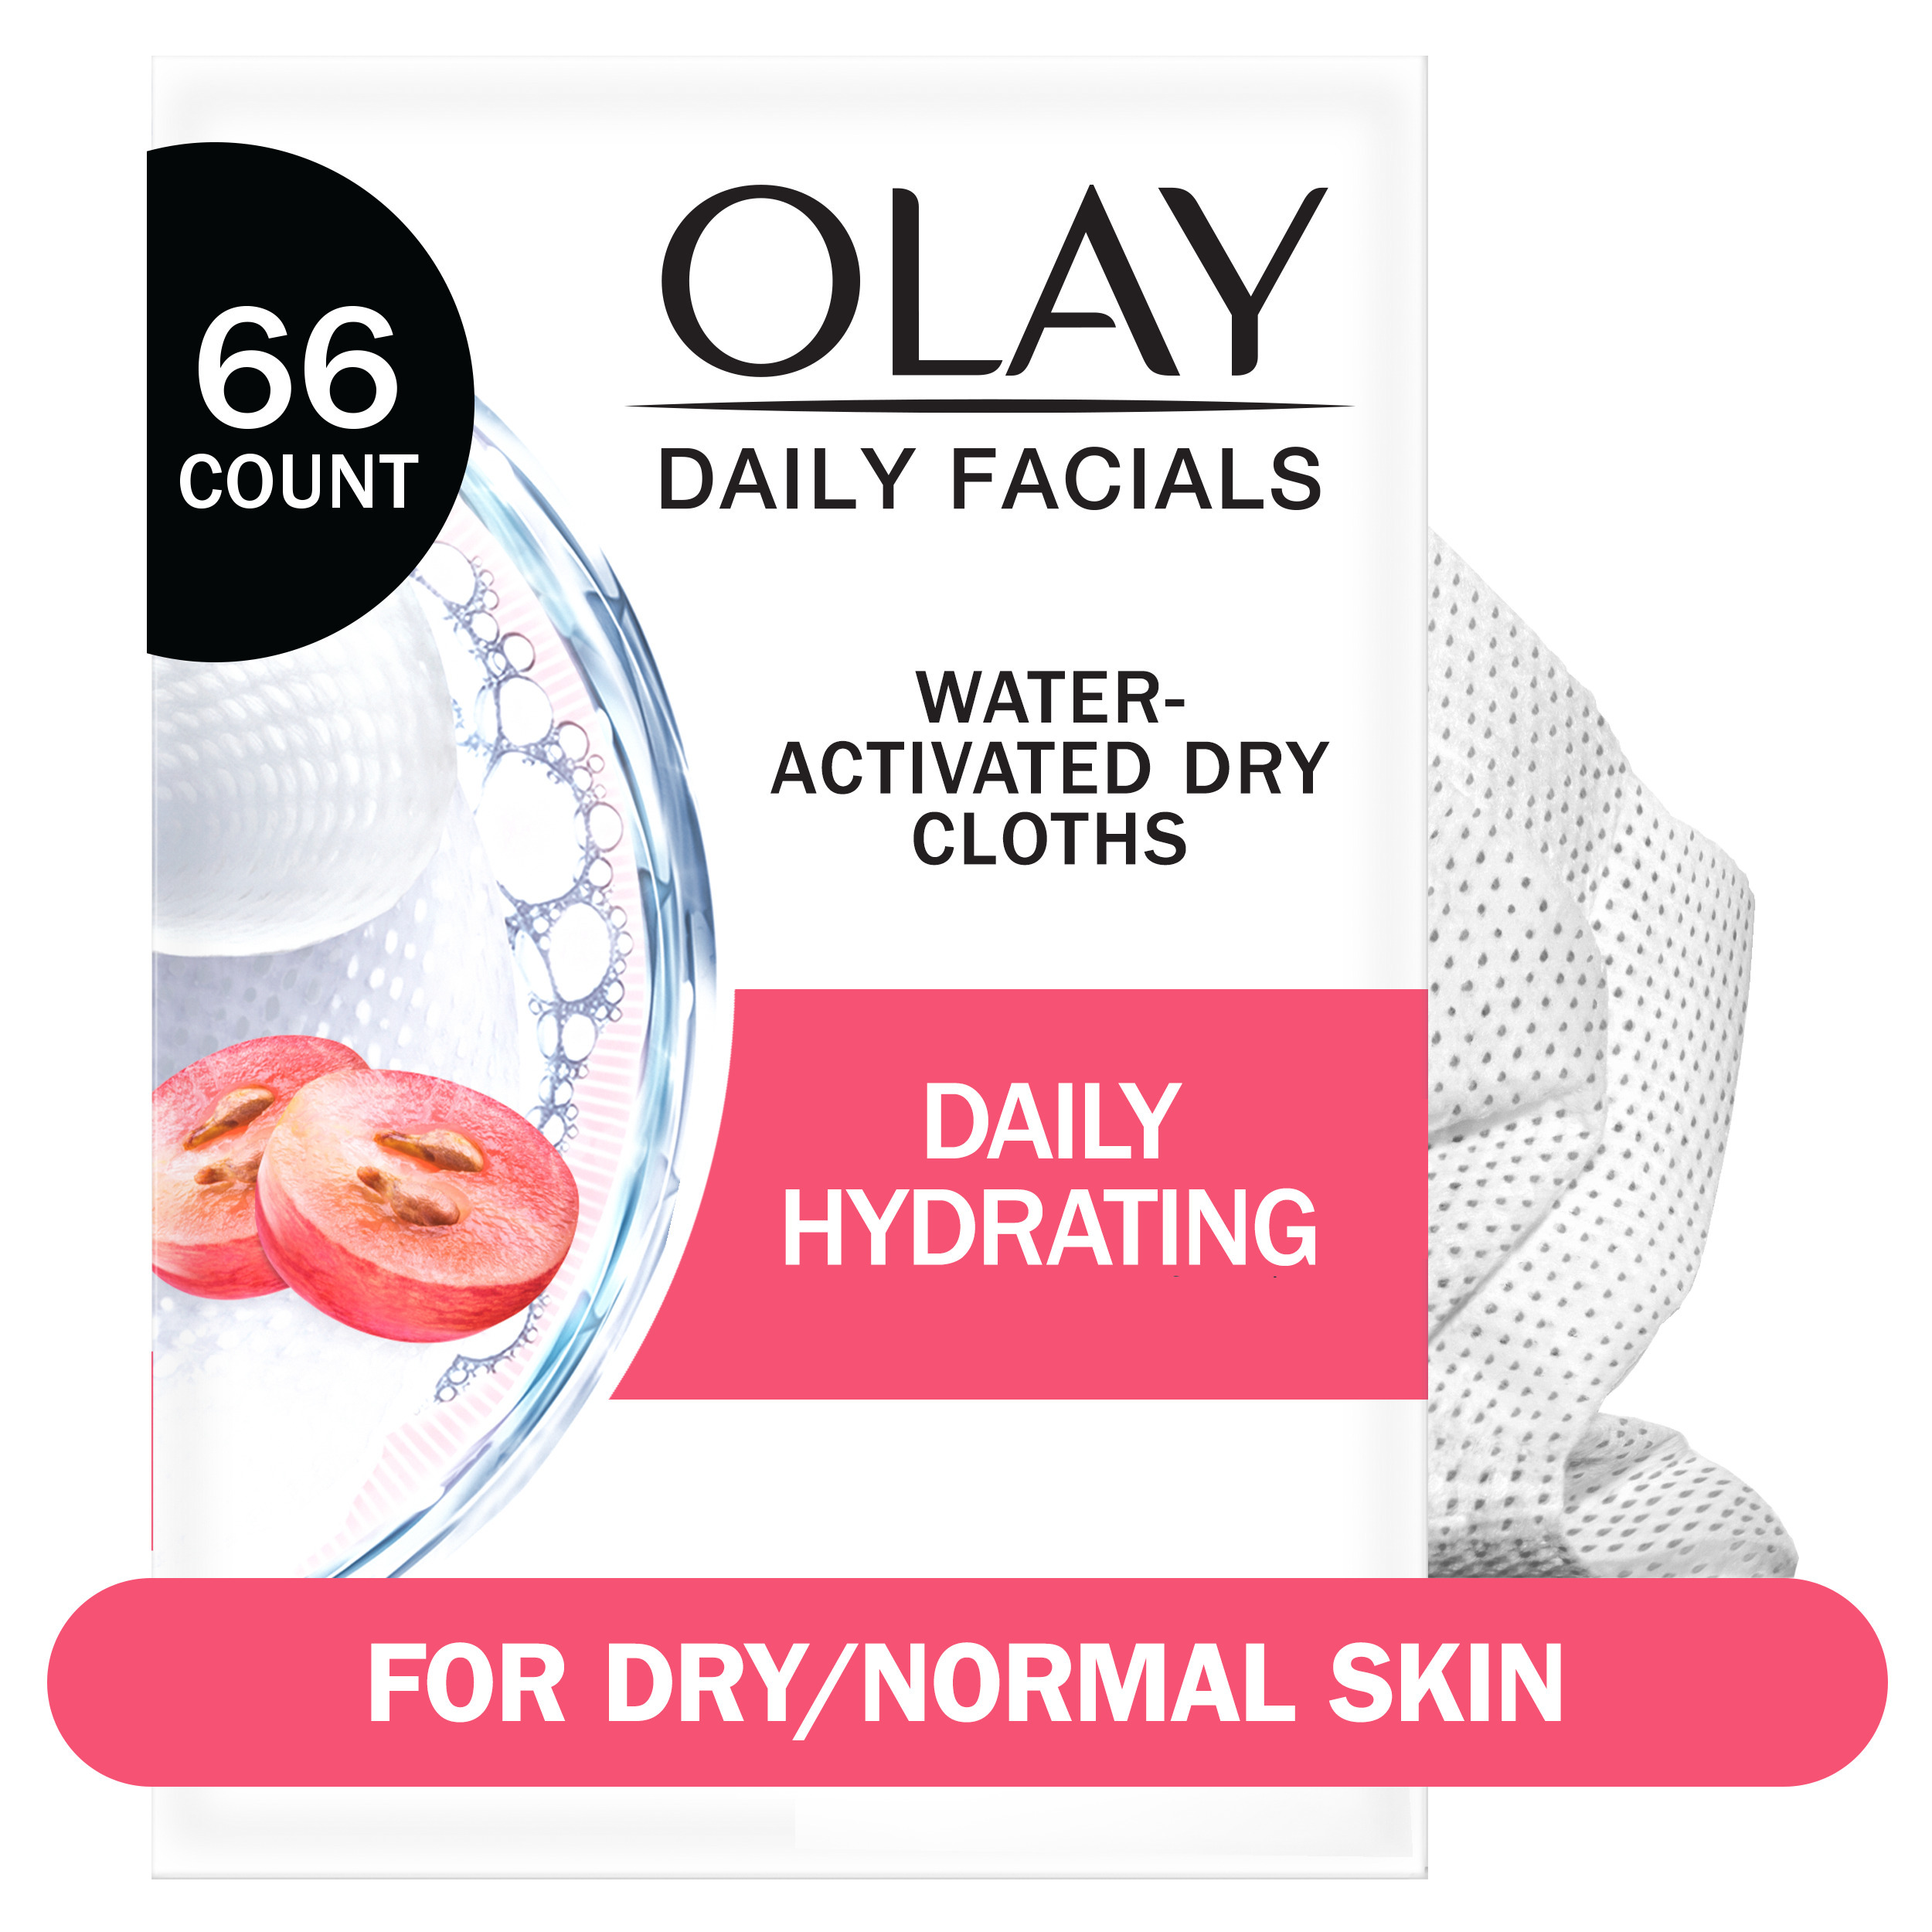 Olay Skincare Daily Hydrating Cleansing Facial Wipes, All Skin Types, Fragrance-Free, 66 Count - image 1 of 10